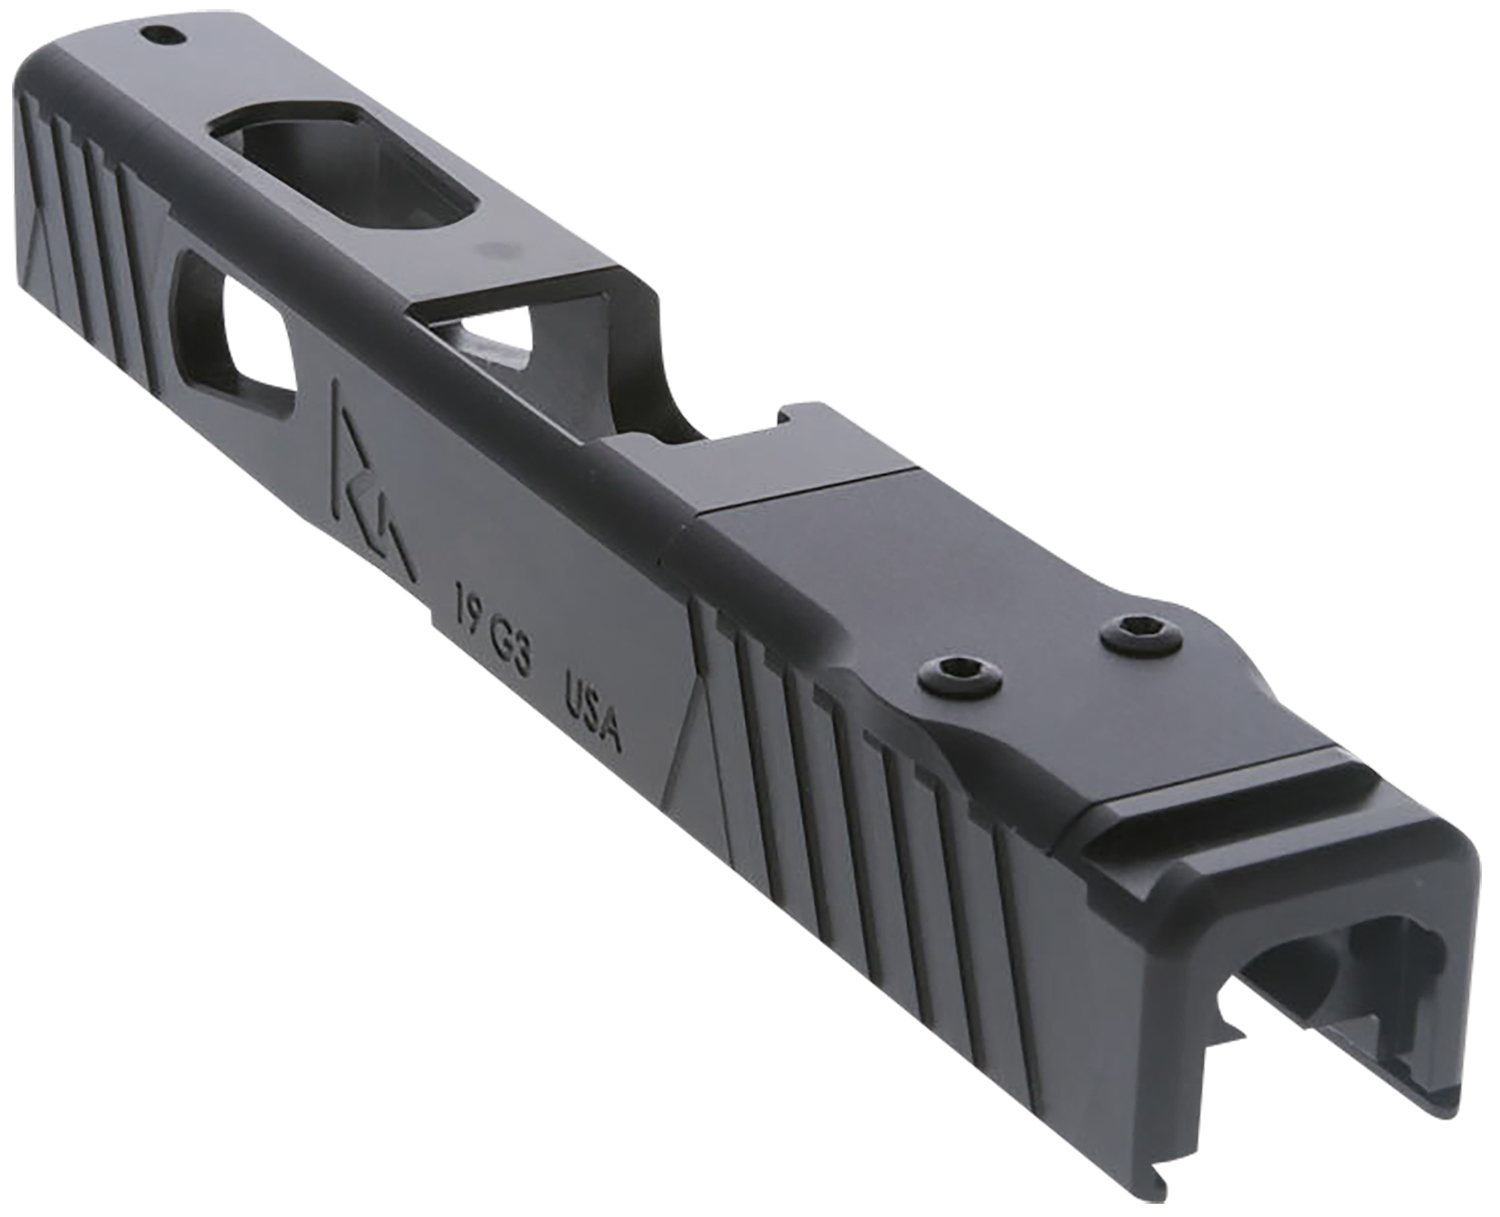 Rival Arms RA10G202A Precision Slide A1 QPQ Black 17-4 Stainless Steel with Front/Rear Serrations & RMR Optic Cut for 9mm Luger Glock 19 Gen3